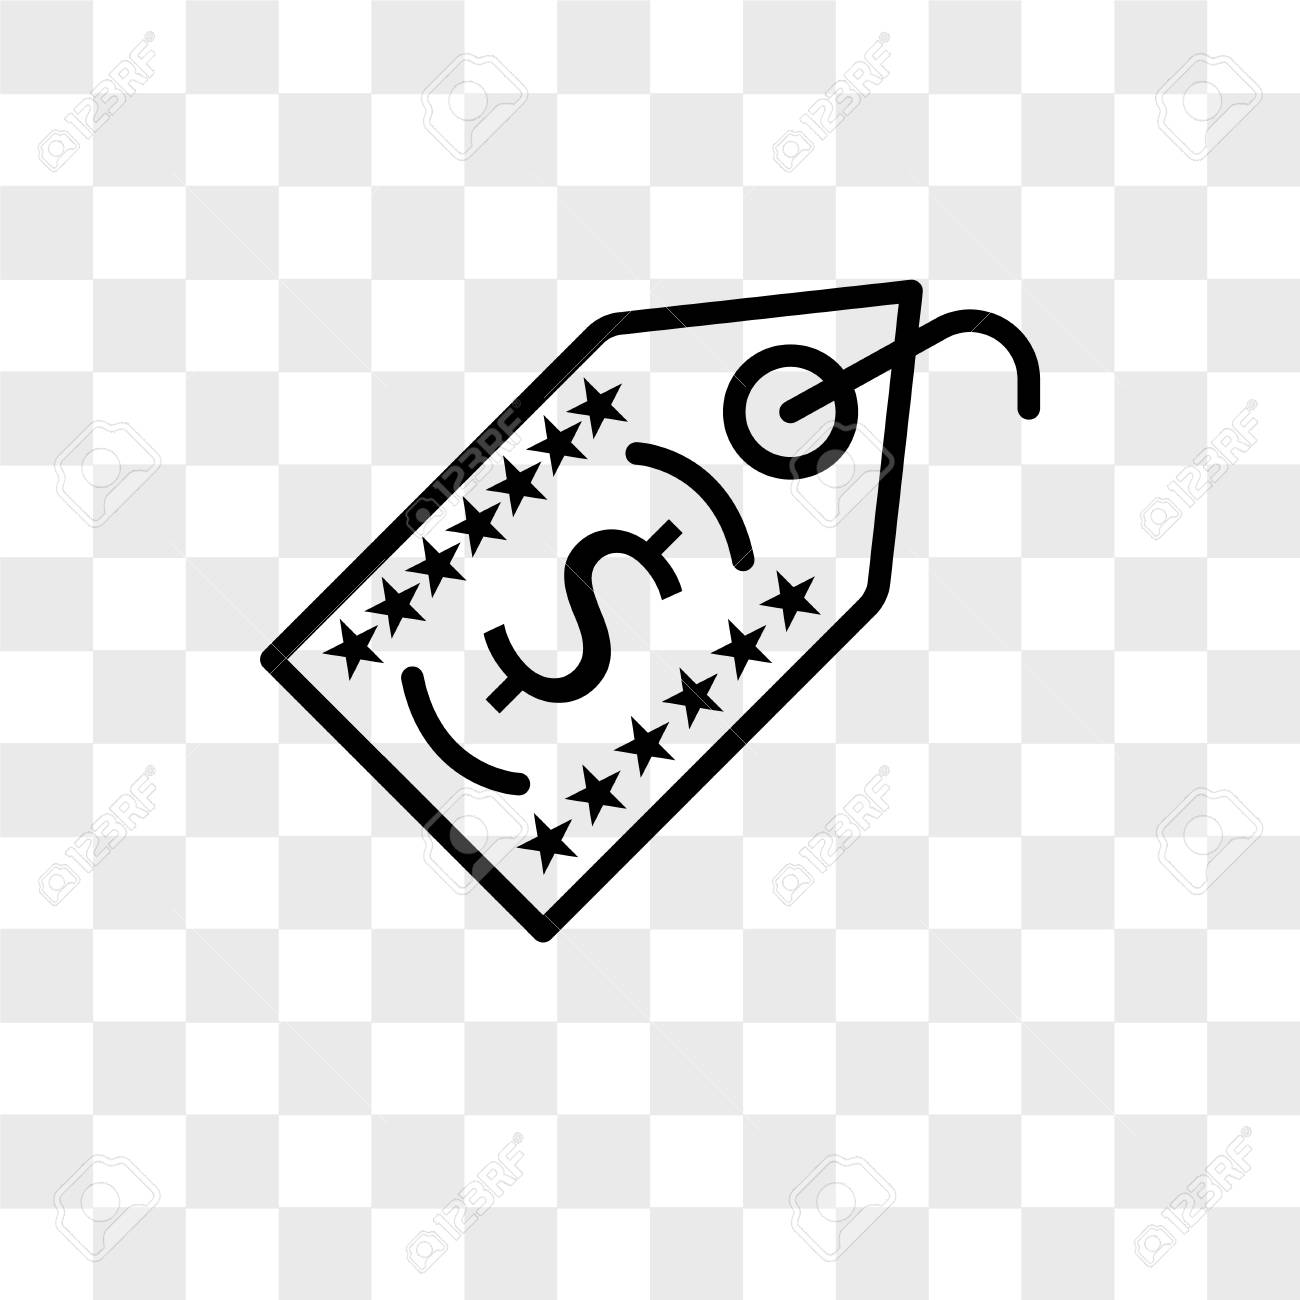 Price Tag Vector Icon Isolated On Transp